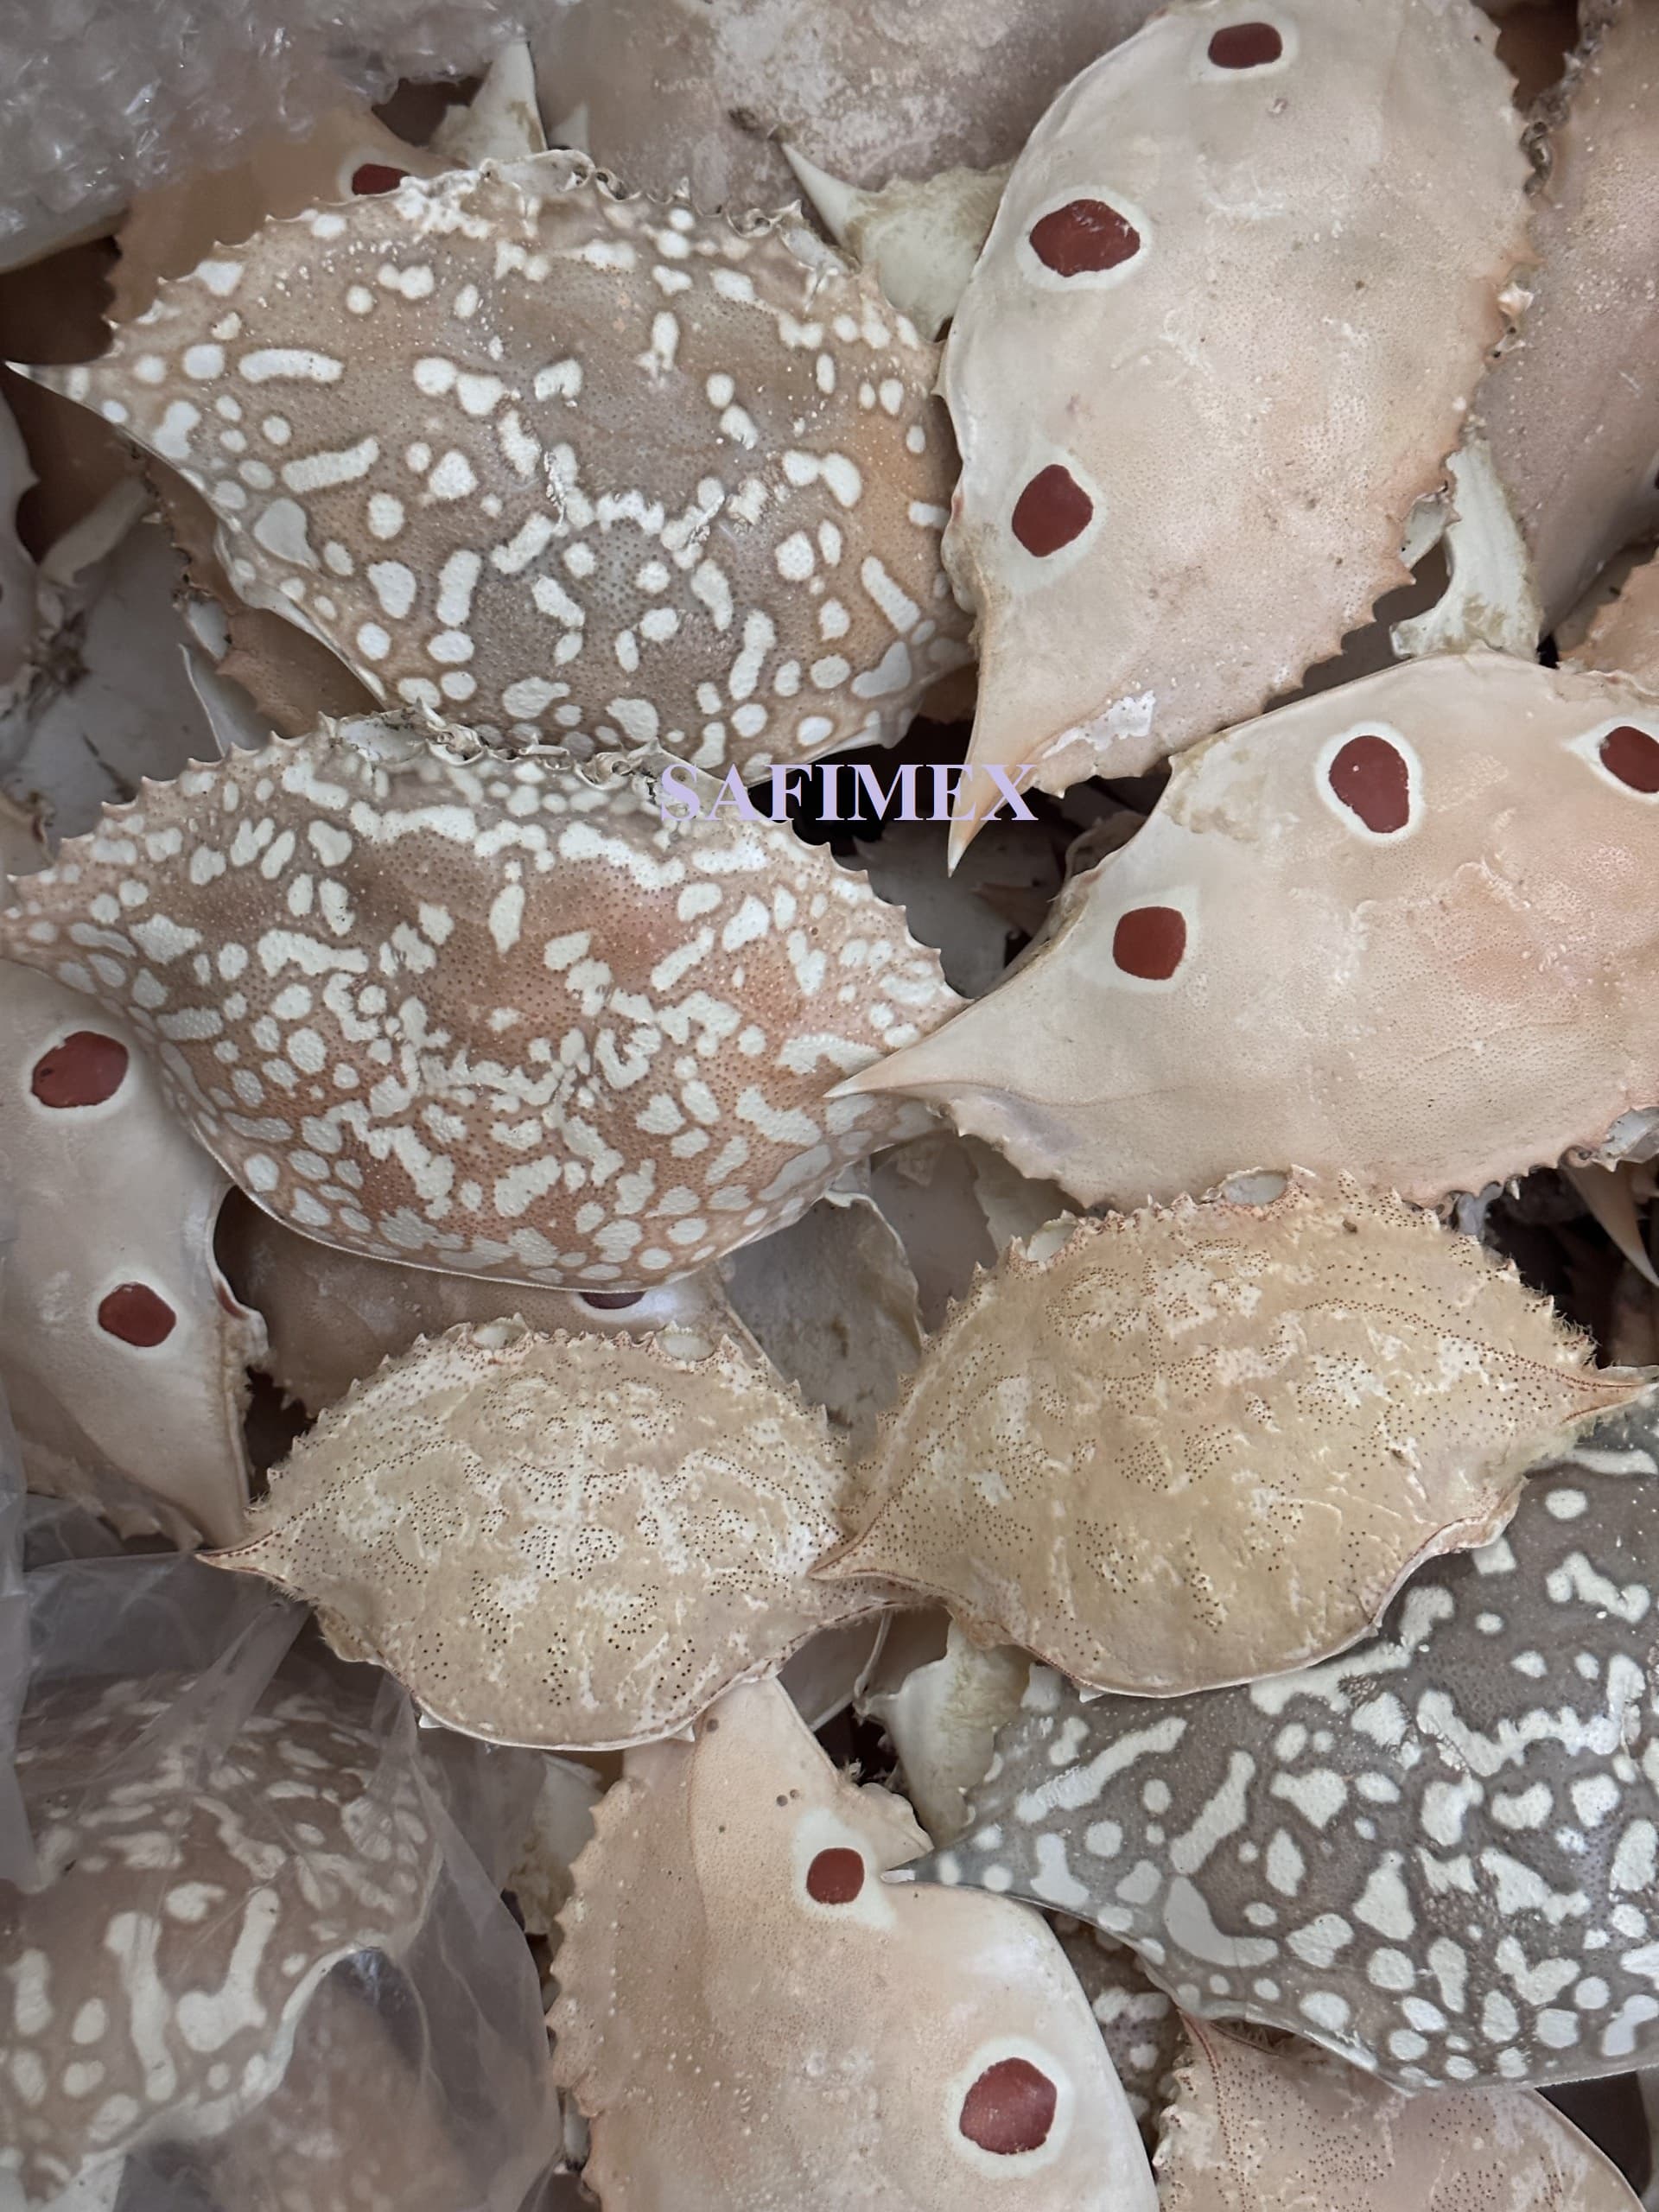 Whole cleaned crab shell cheap price for export_High Quality Natural Dried Crab Shell For Food Stuff